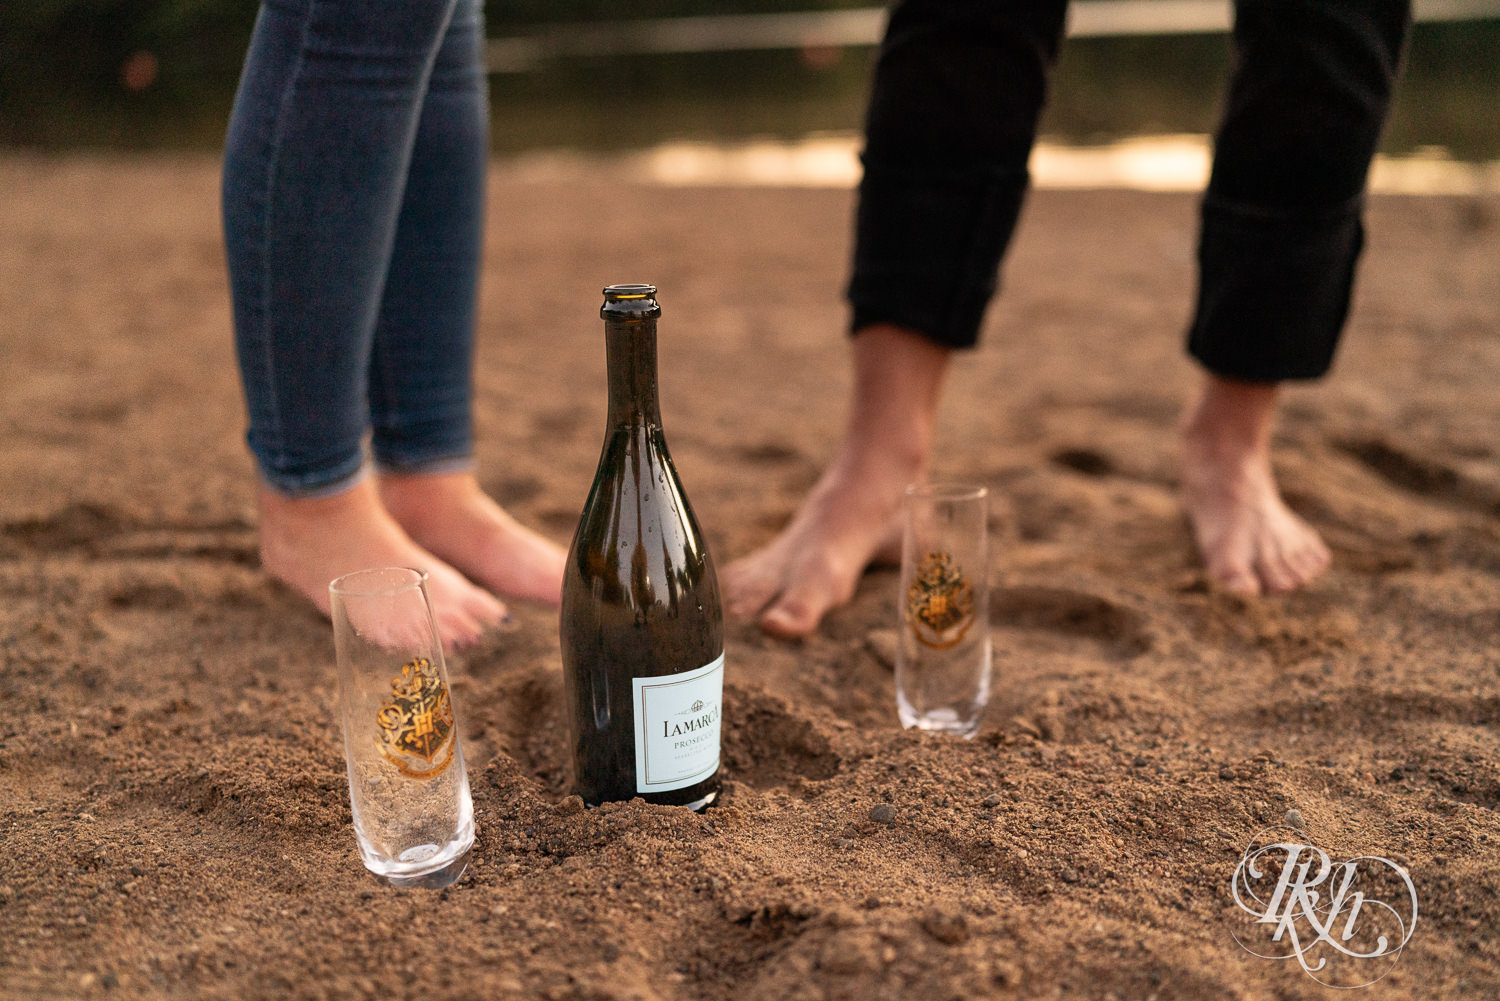 Blond woman and man in white shirts and jeans drink champagne on the beach at Lebanon Hills Regional Park in Eagan, Minnesota.